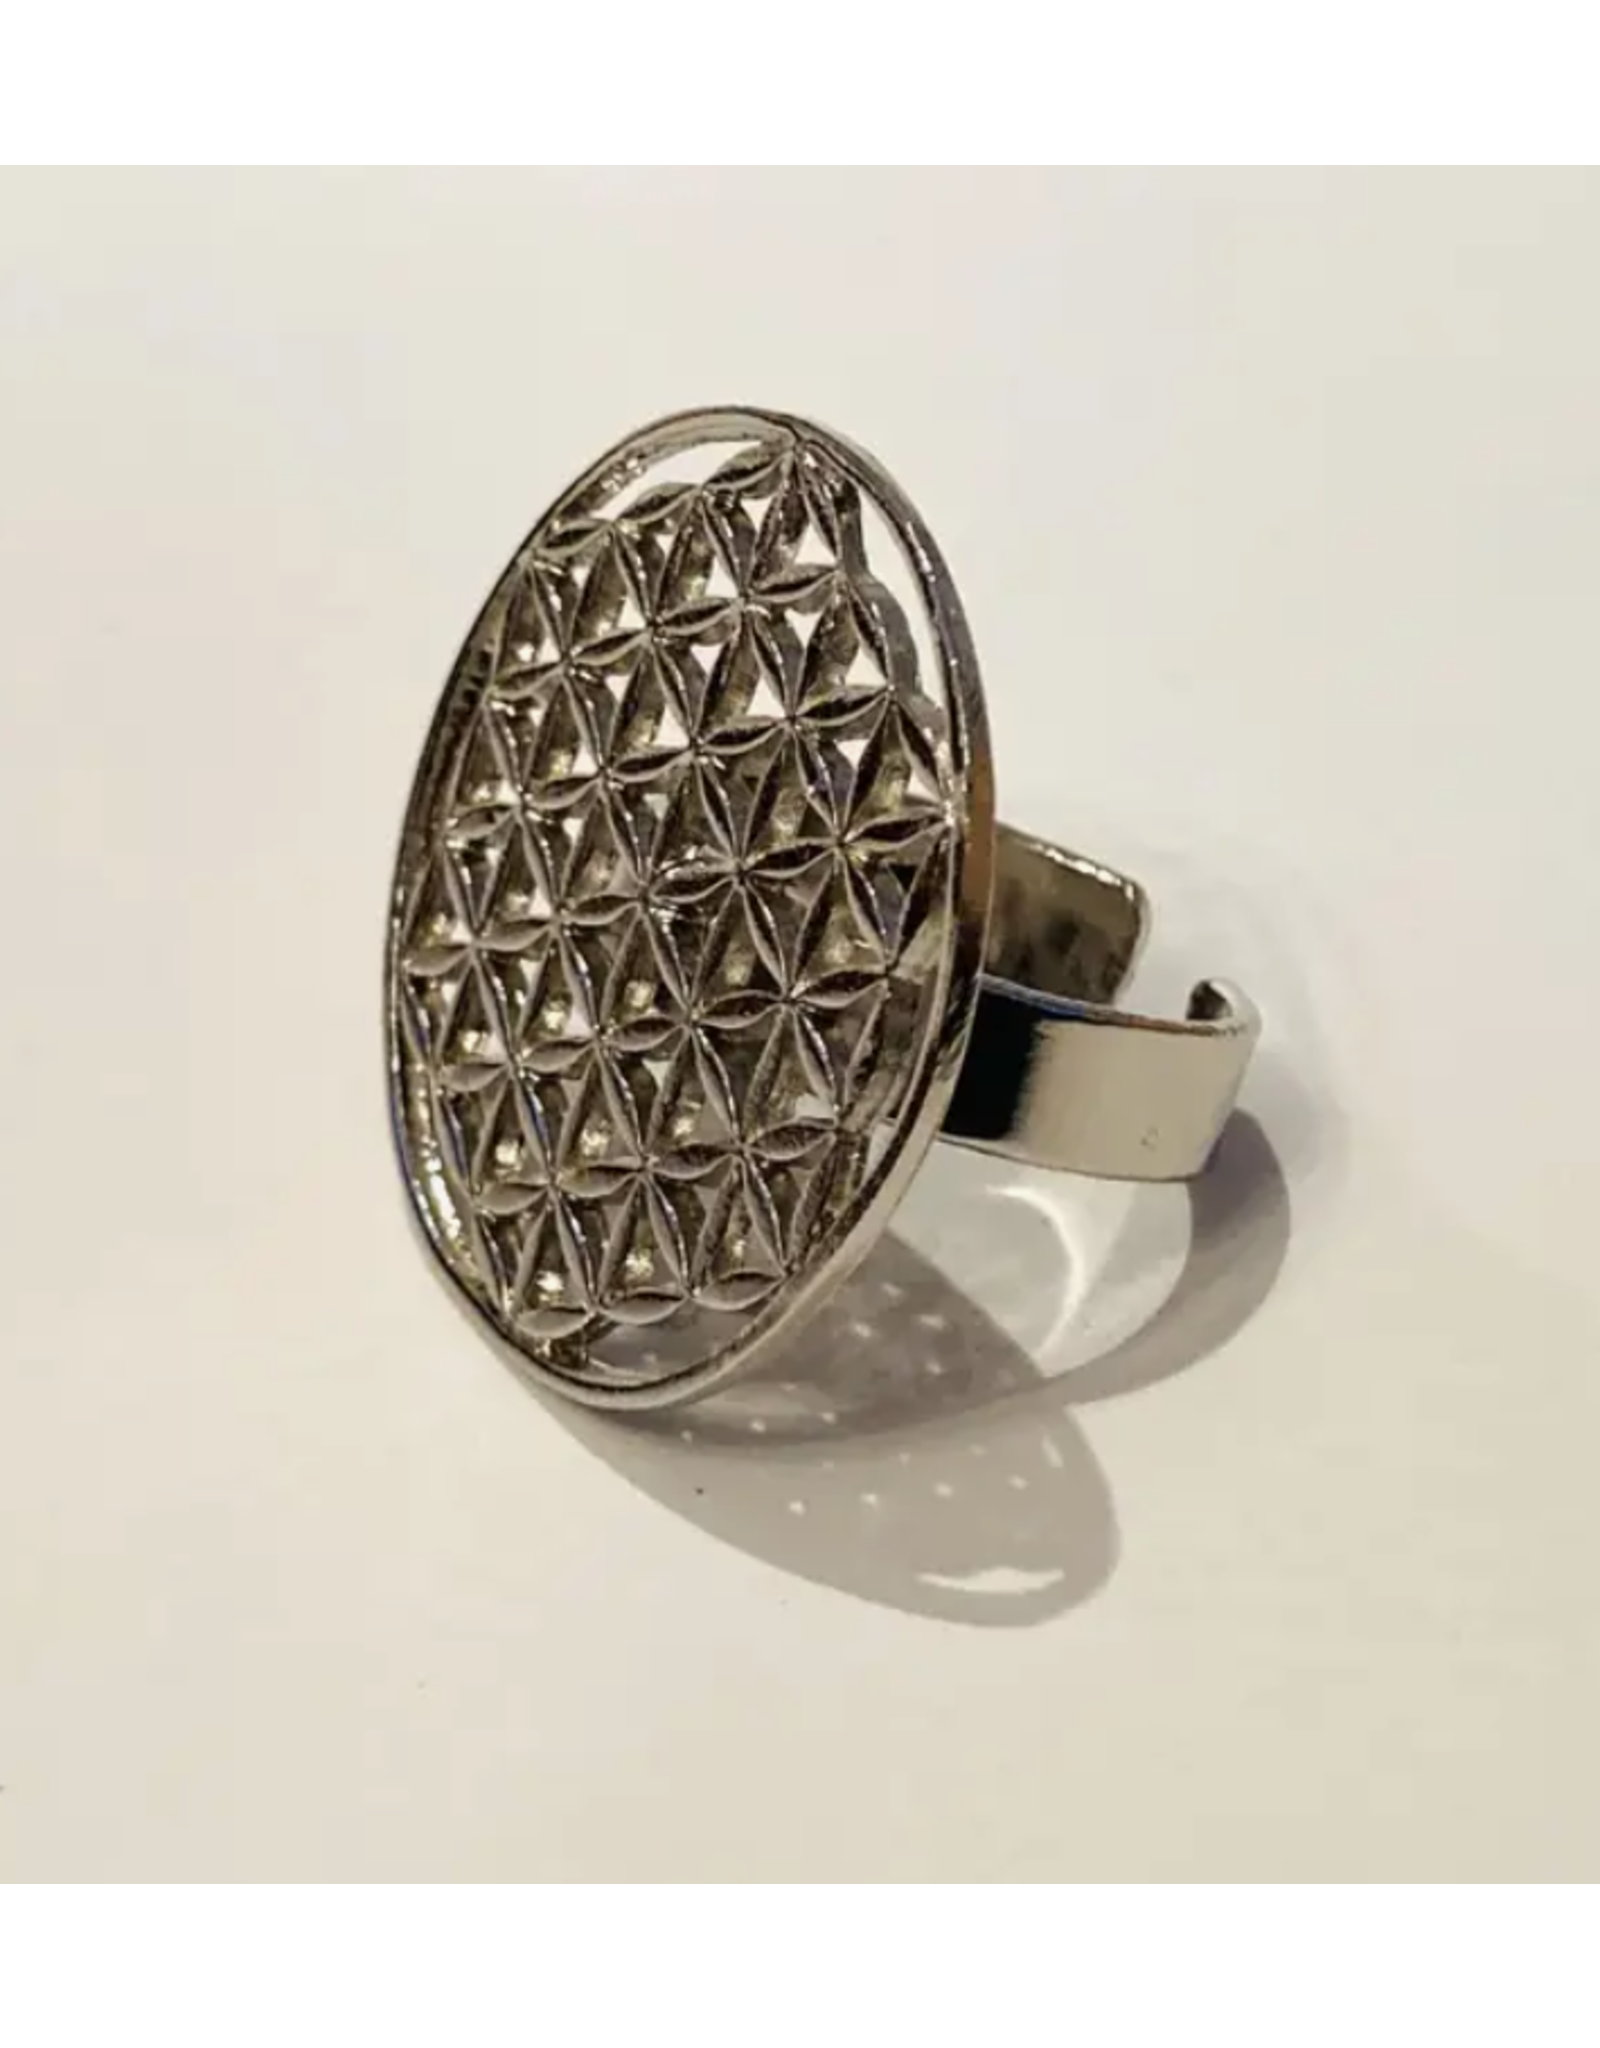 Egypt Triangles Grid Ring - Chrome Plated Brass, Egypt